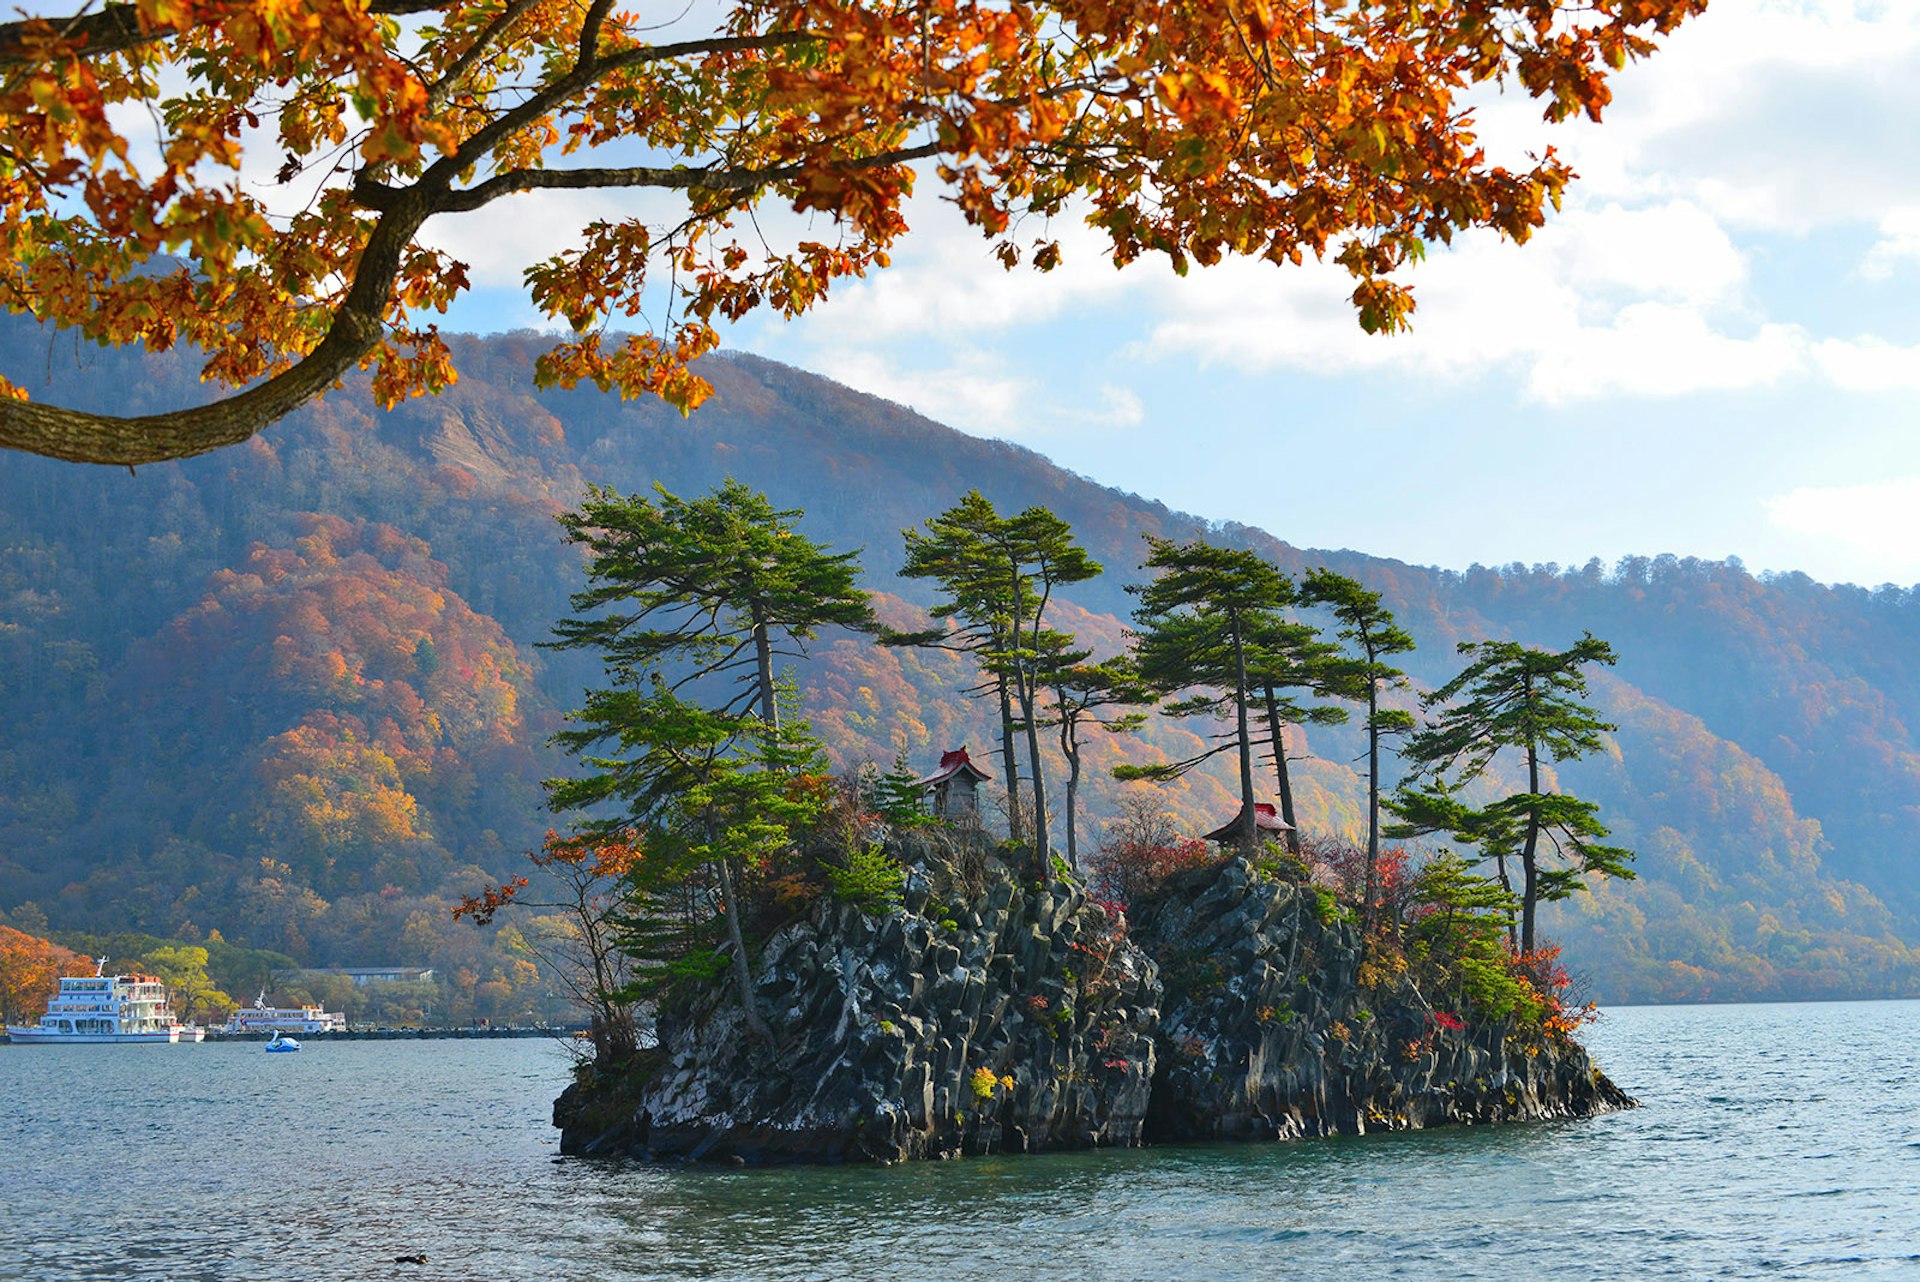 Two rocky outcrops covered in trees in the middle of a still lake